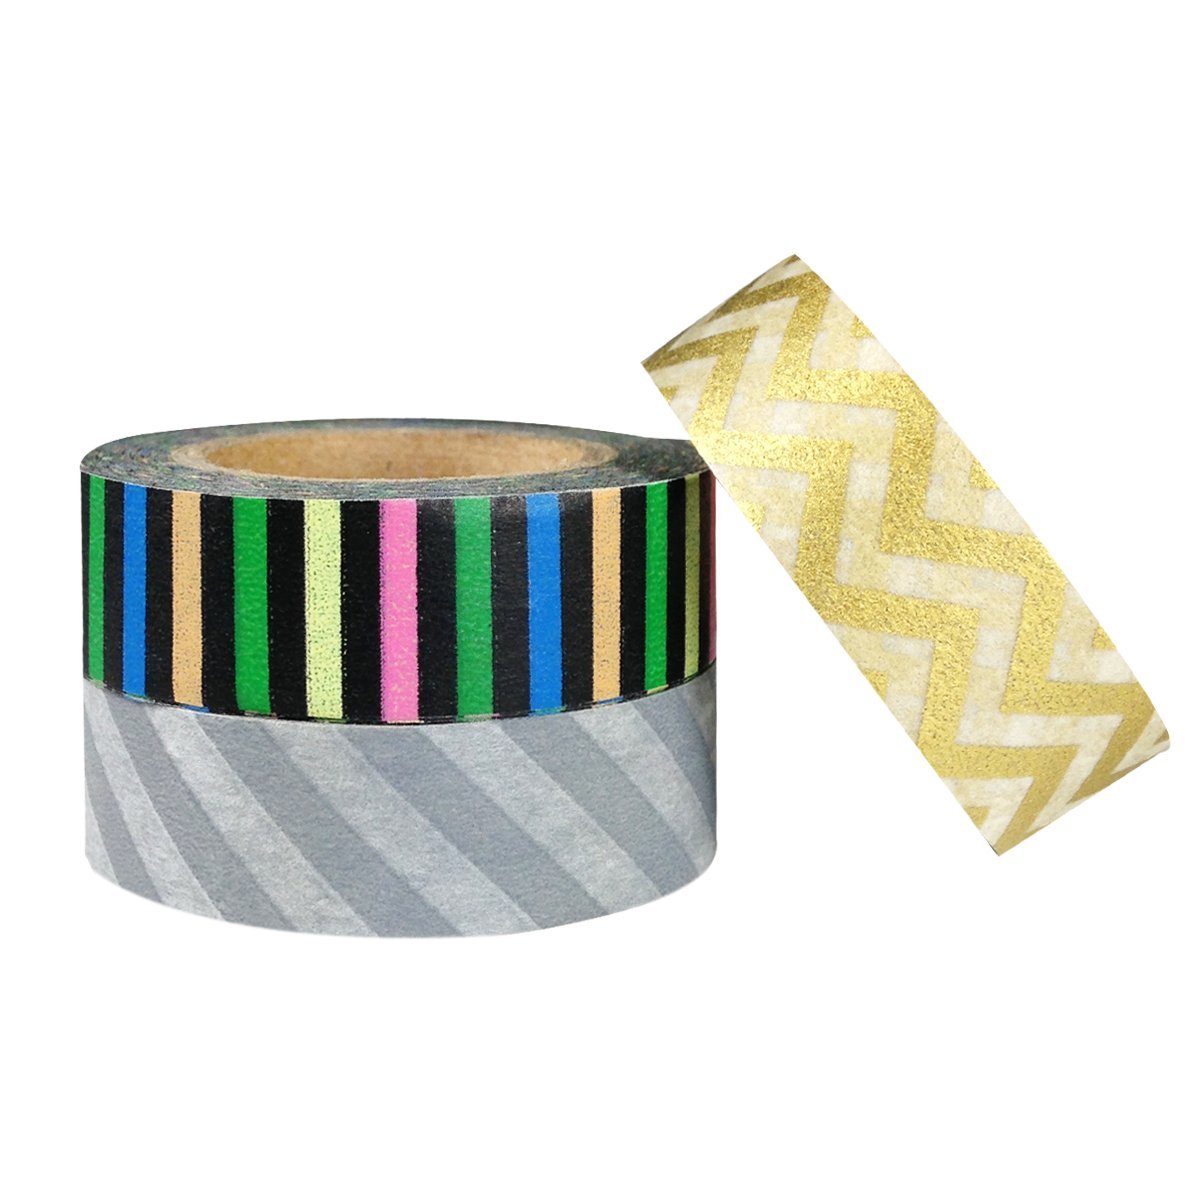 Wrapables 50 Scalloped Gift Tags/Kraft Hang Tags with Free Cut Strings & Set of 3 Washi Tape